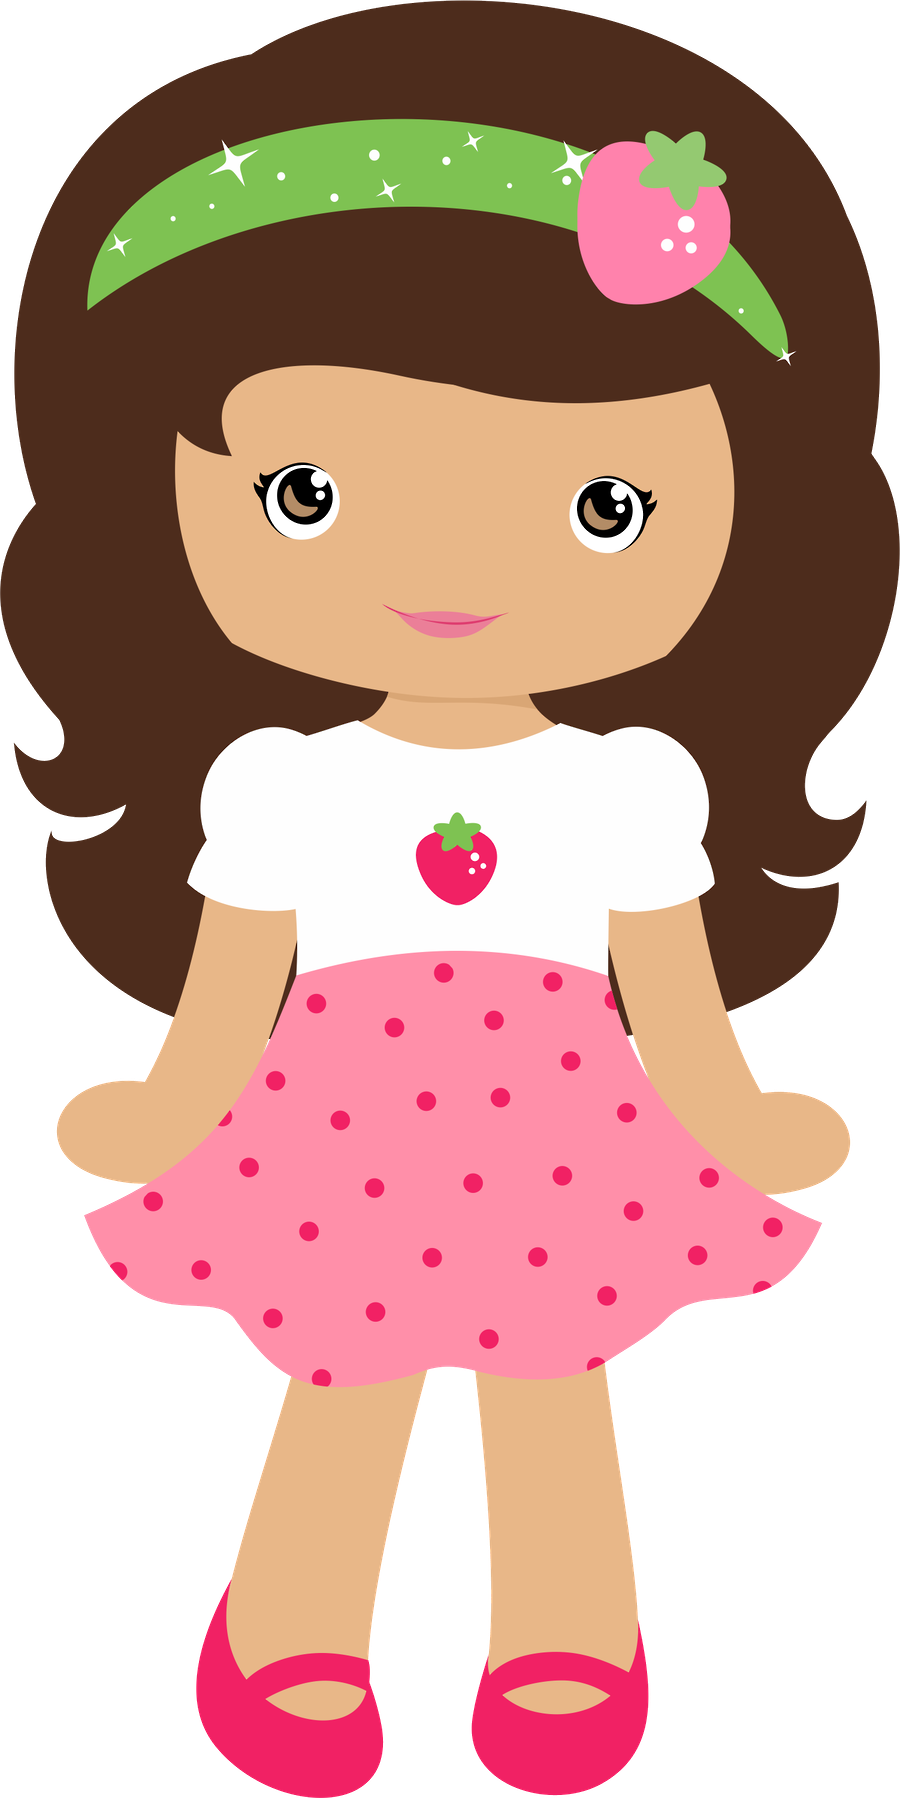 doll clipart childrens toy